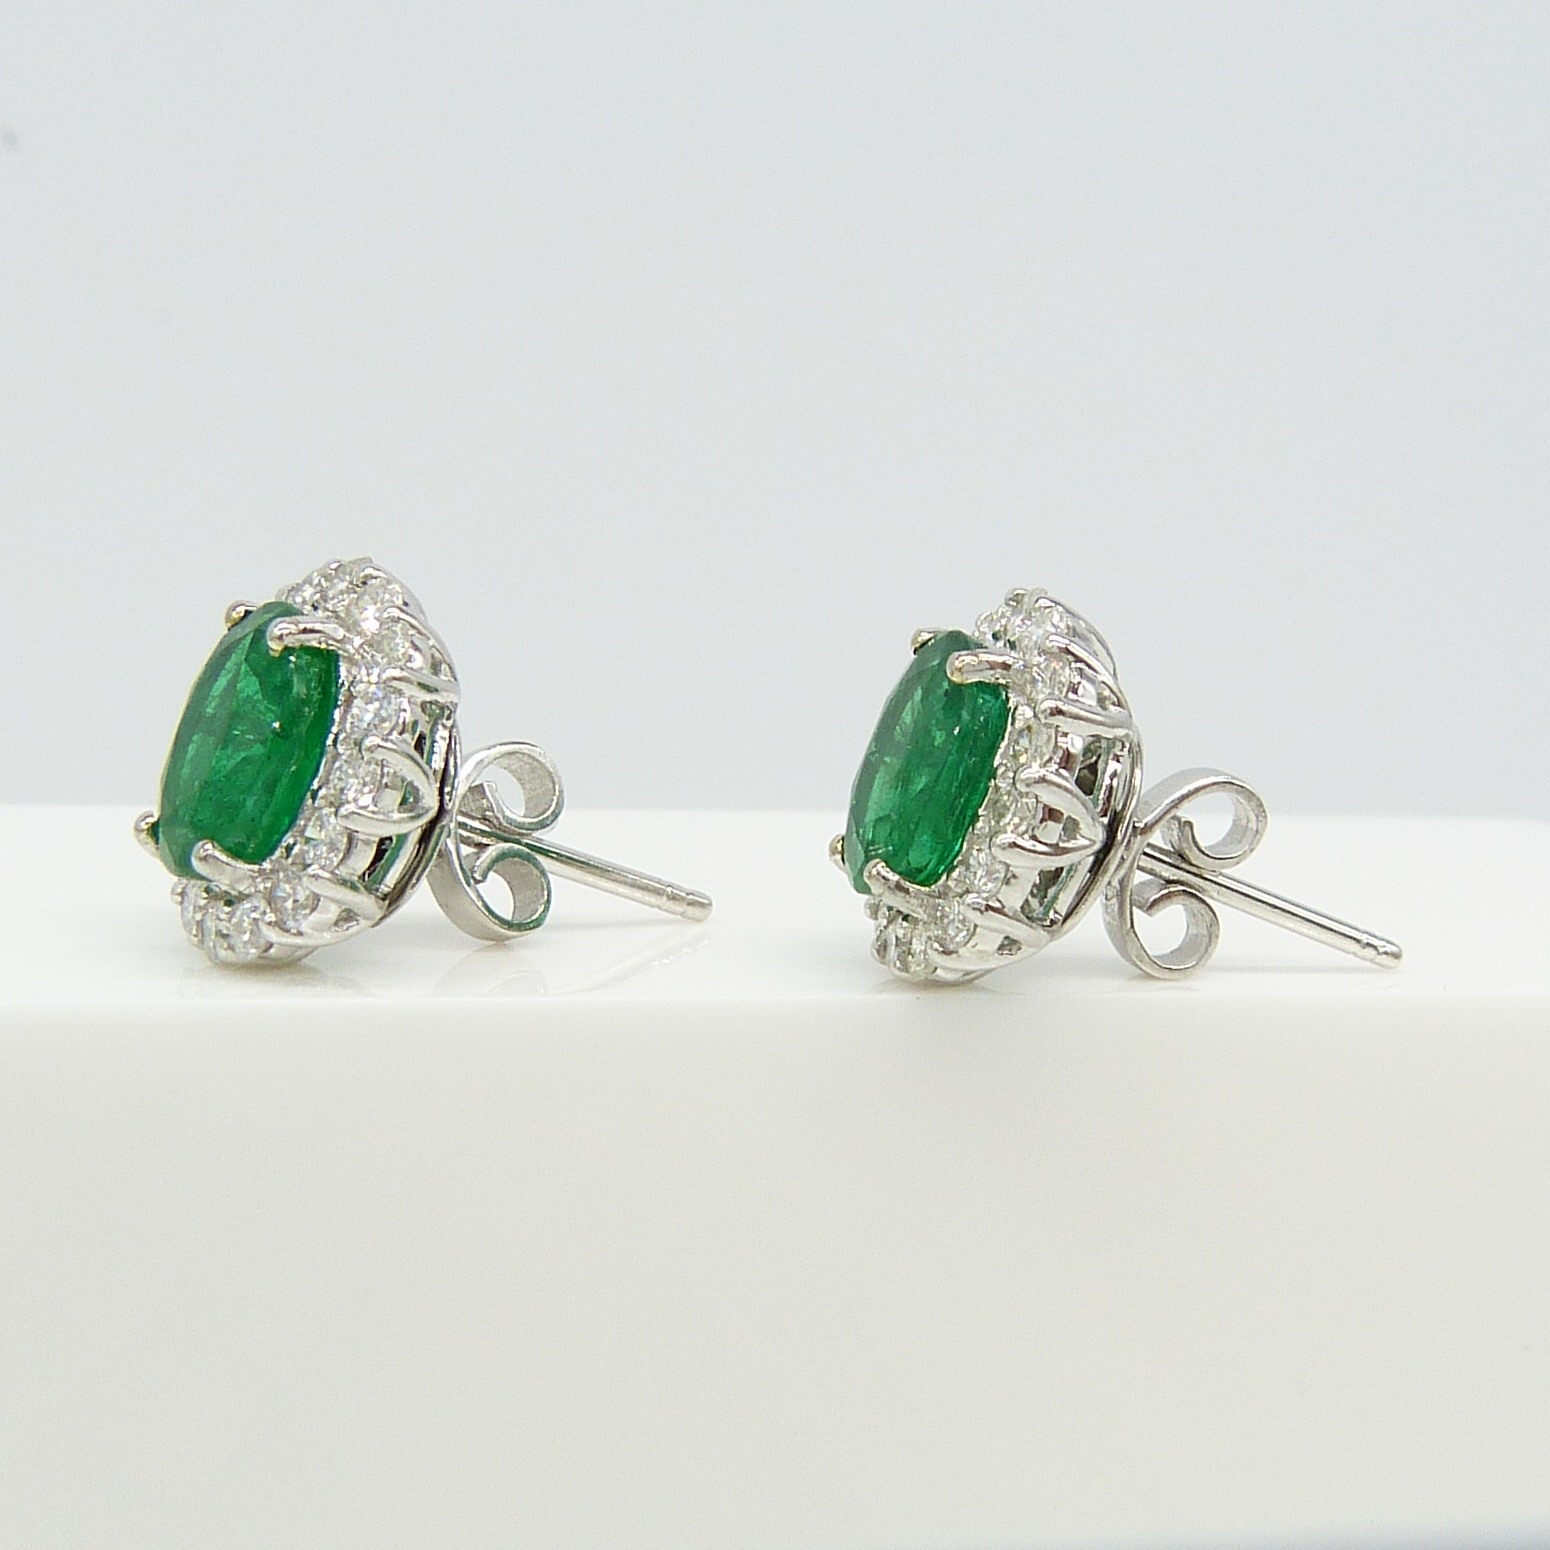 Pair of 18ct white gold 2.48 carat emerald and diamond halo ear studs, boxed - Image 7 of 8